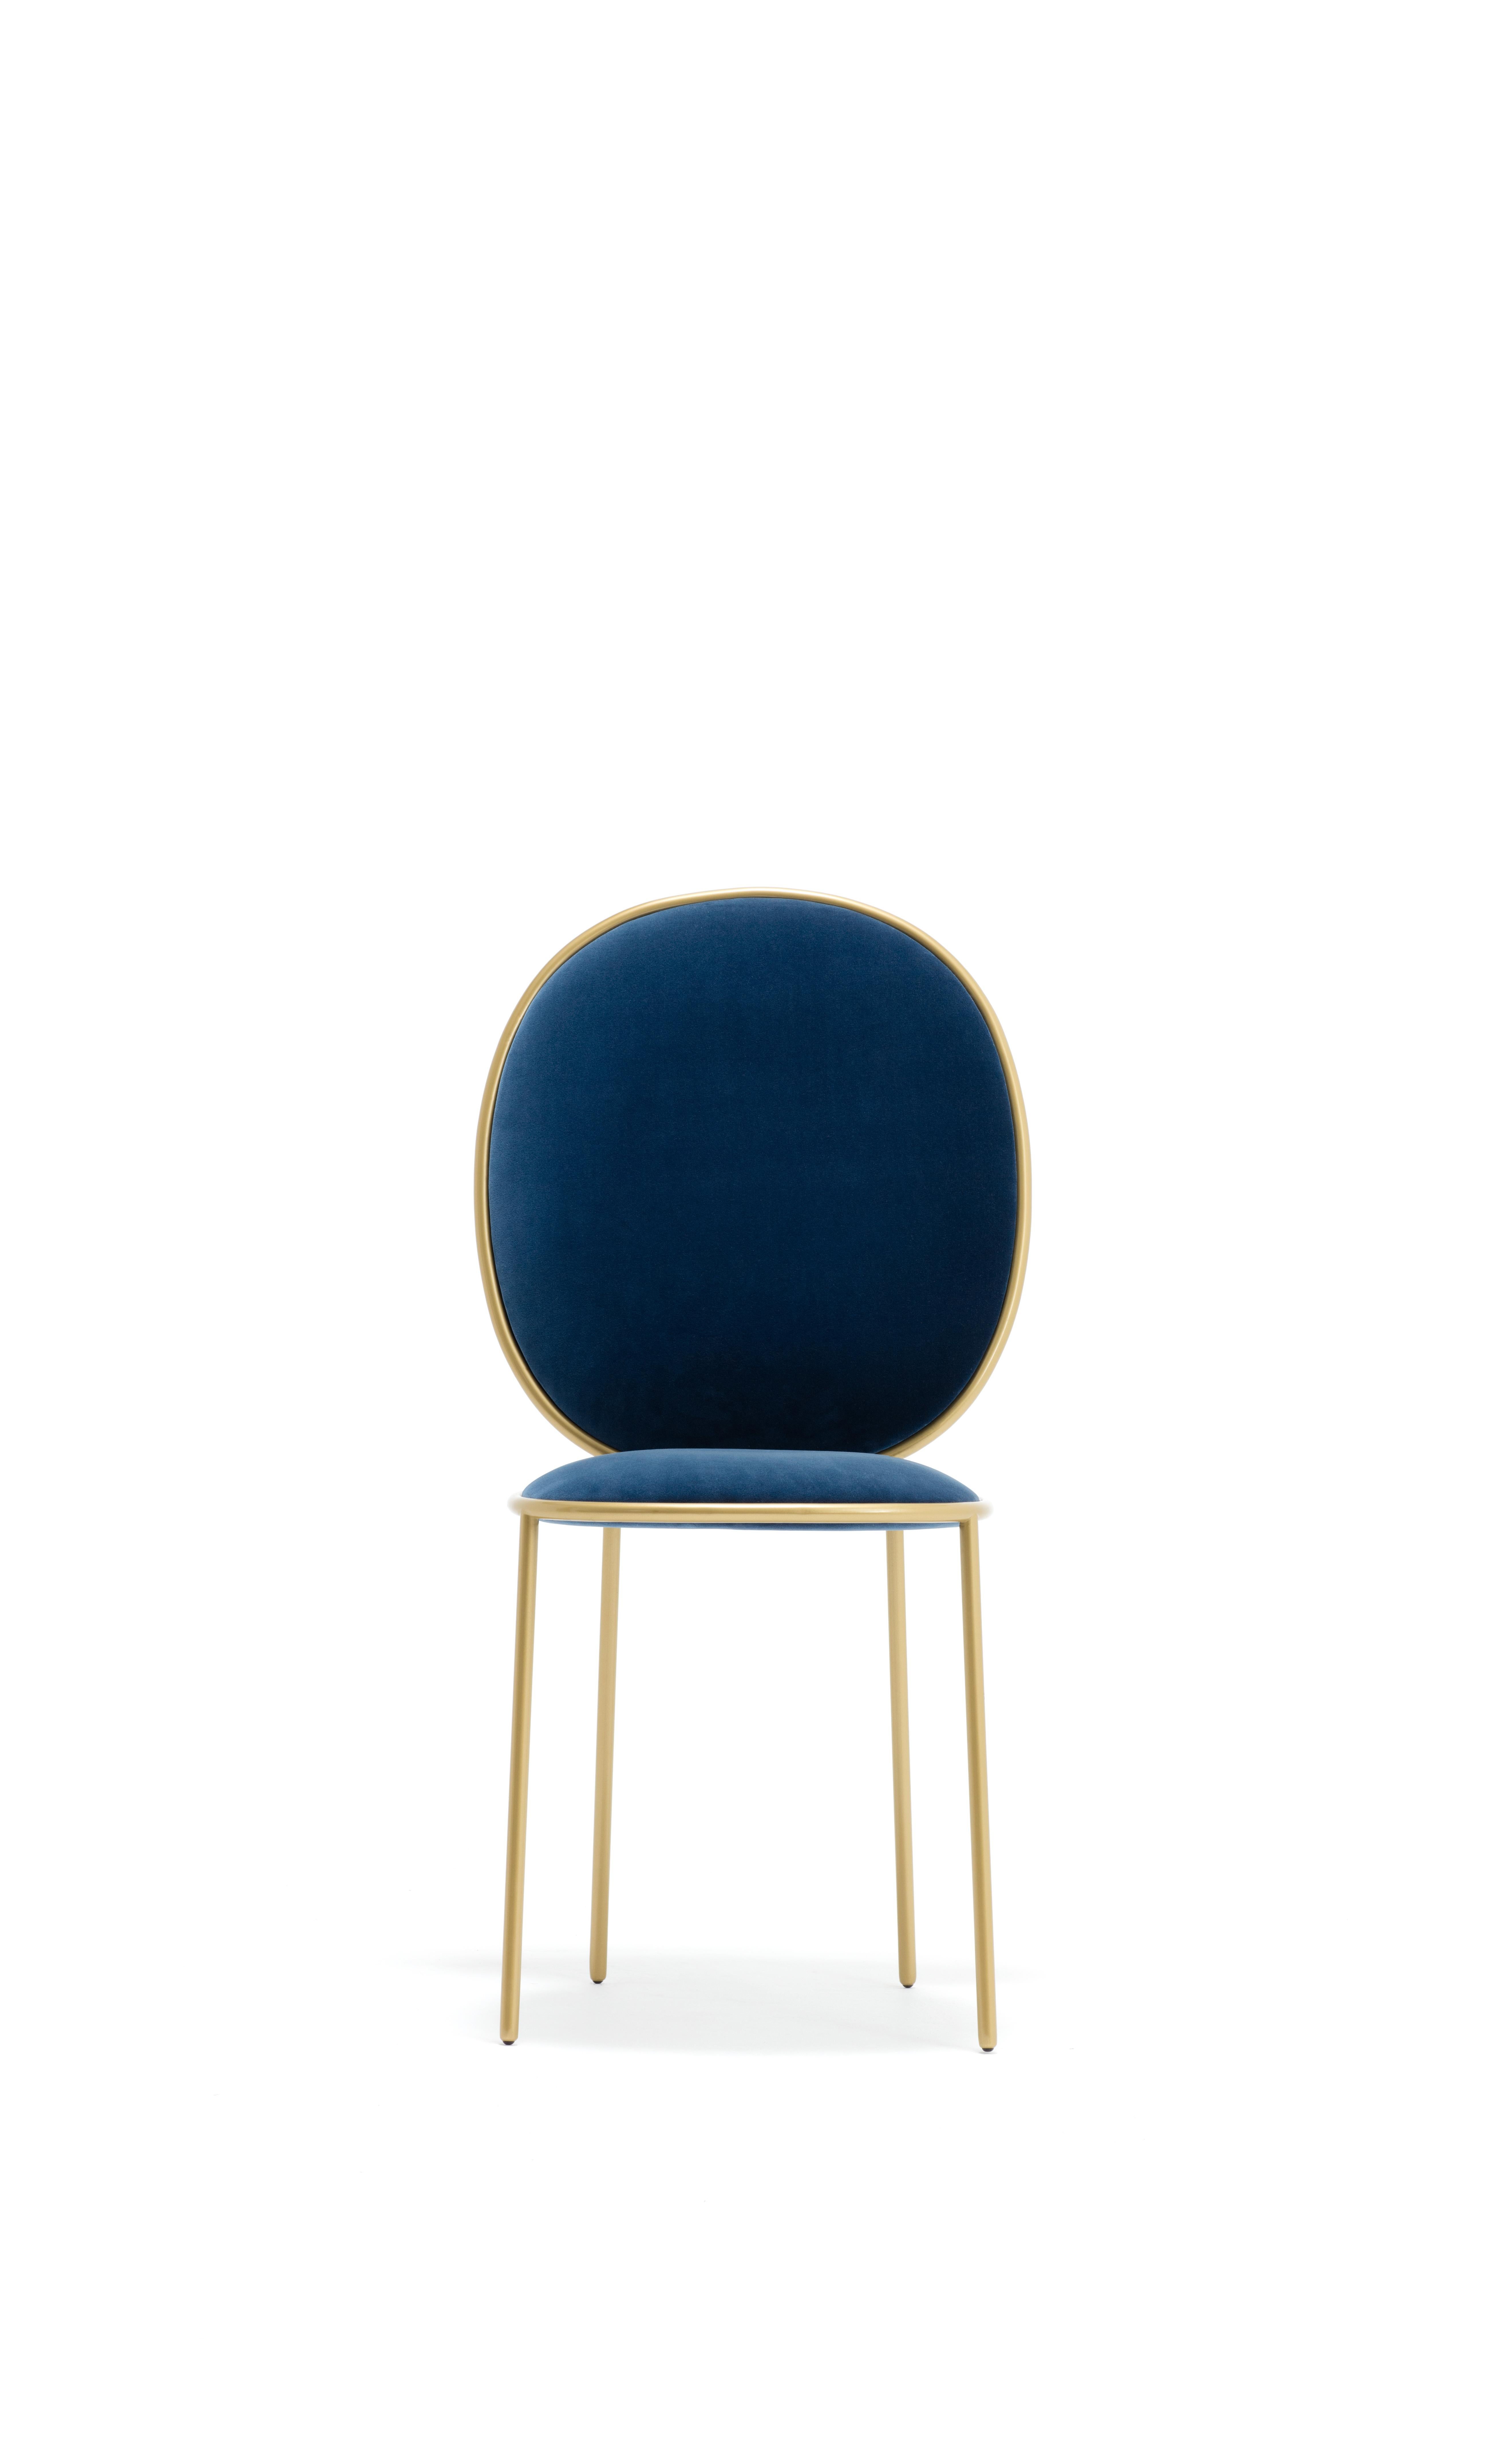 Contemporary indigo blue velvet upholstered dining chair - stay by Nika Zupanc

The Stay Family turns everyday seating into a special occasion. The Dining Chair and Dining Armchair are variations on an elegant social theme whilst the Dining Table